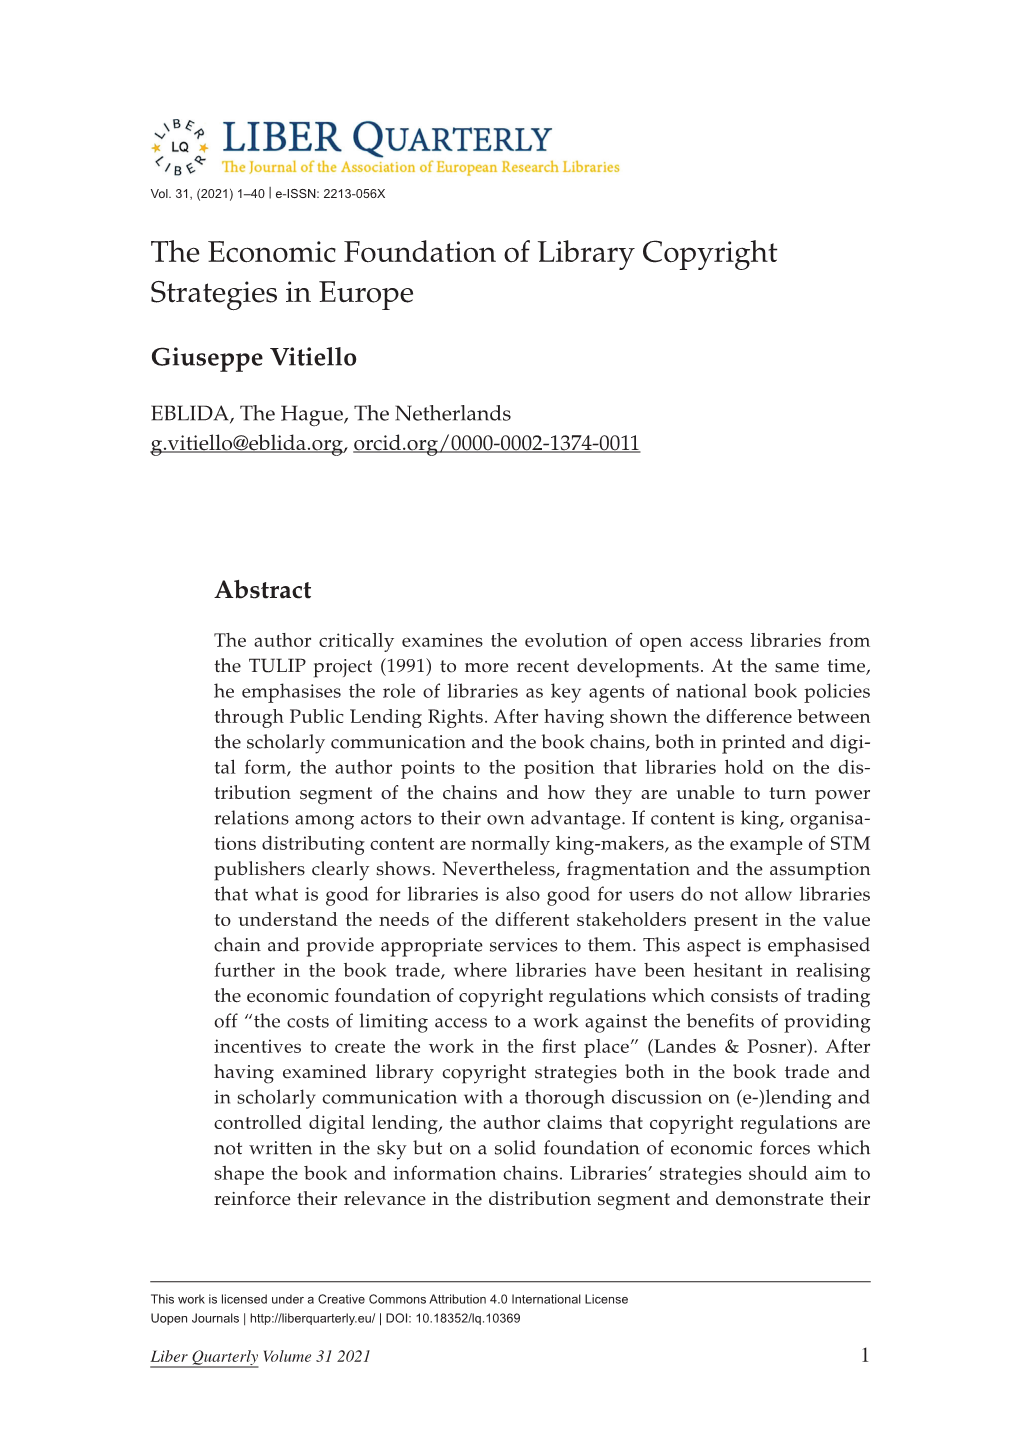 The Economic Foundation of Library Copyright Strategies in Europe